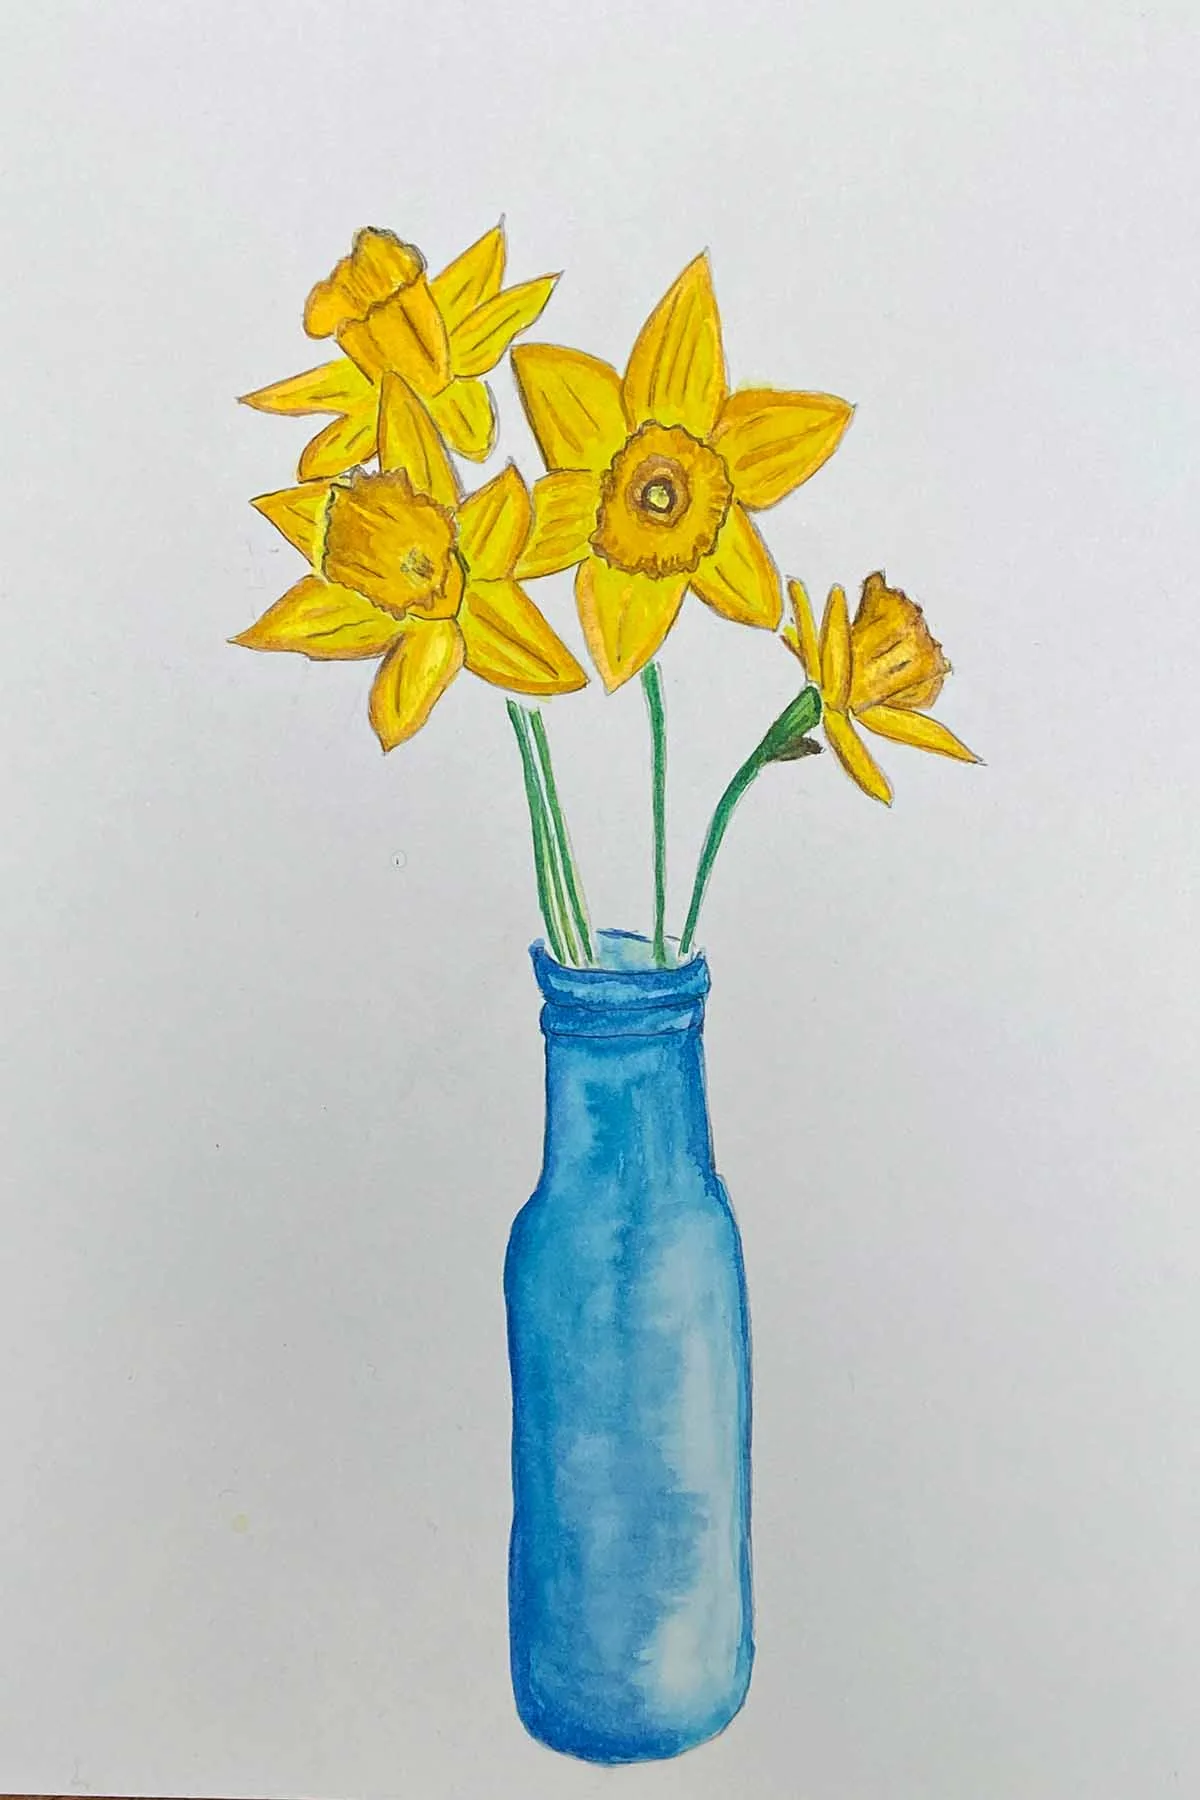 painting and drawing a bunch of daffodils in blue vase